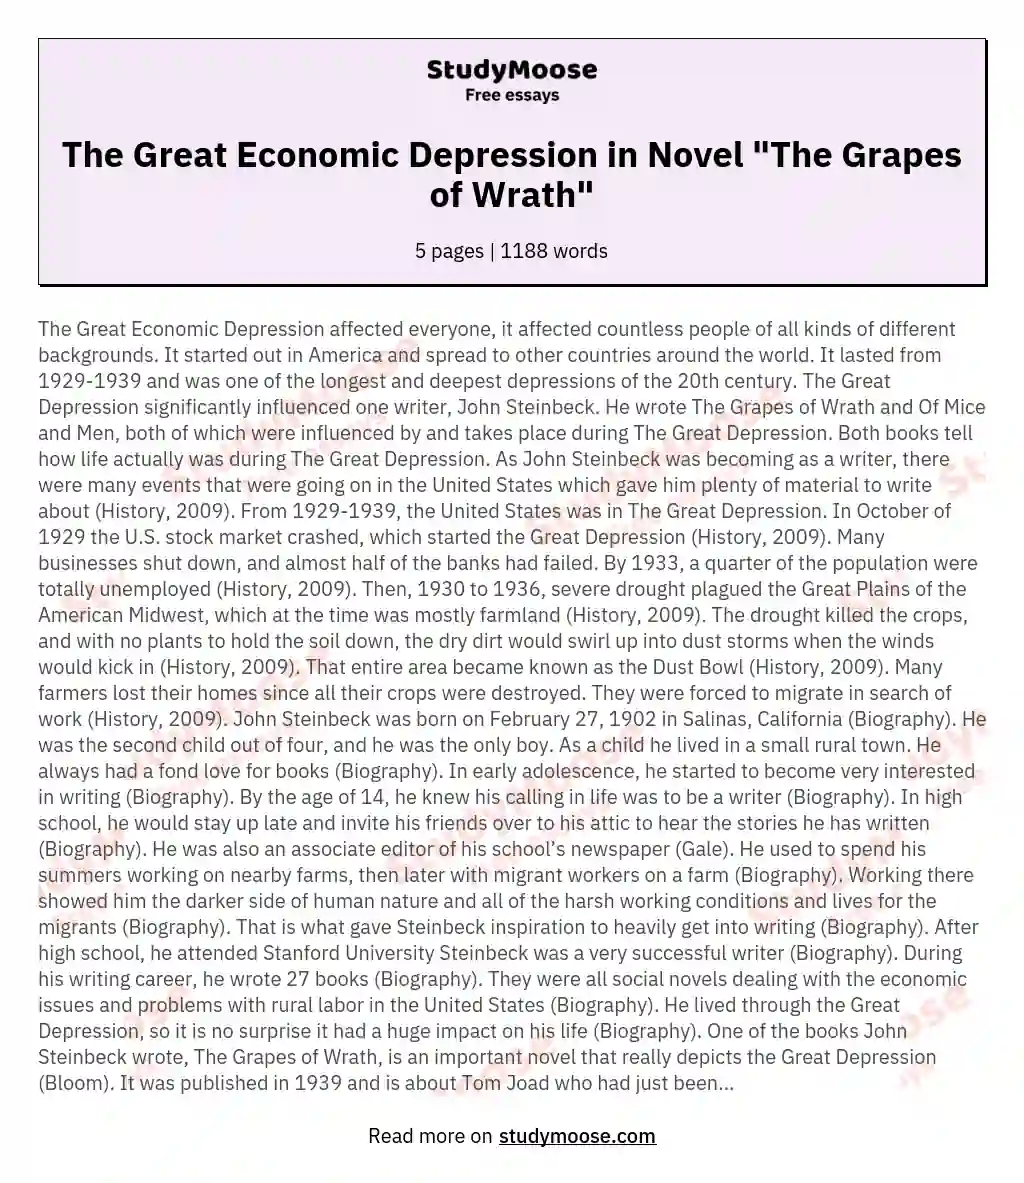 The Great Economic Depression in Novel "The Grapes of Wrath"